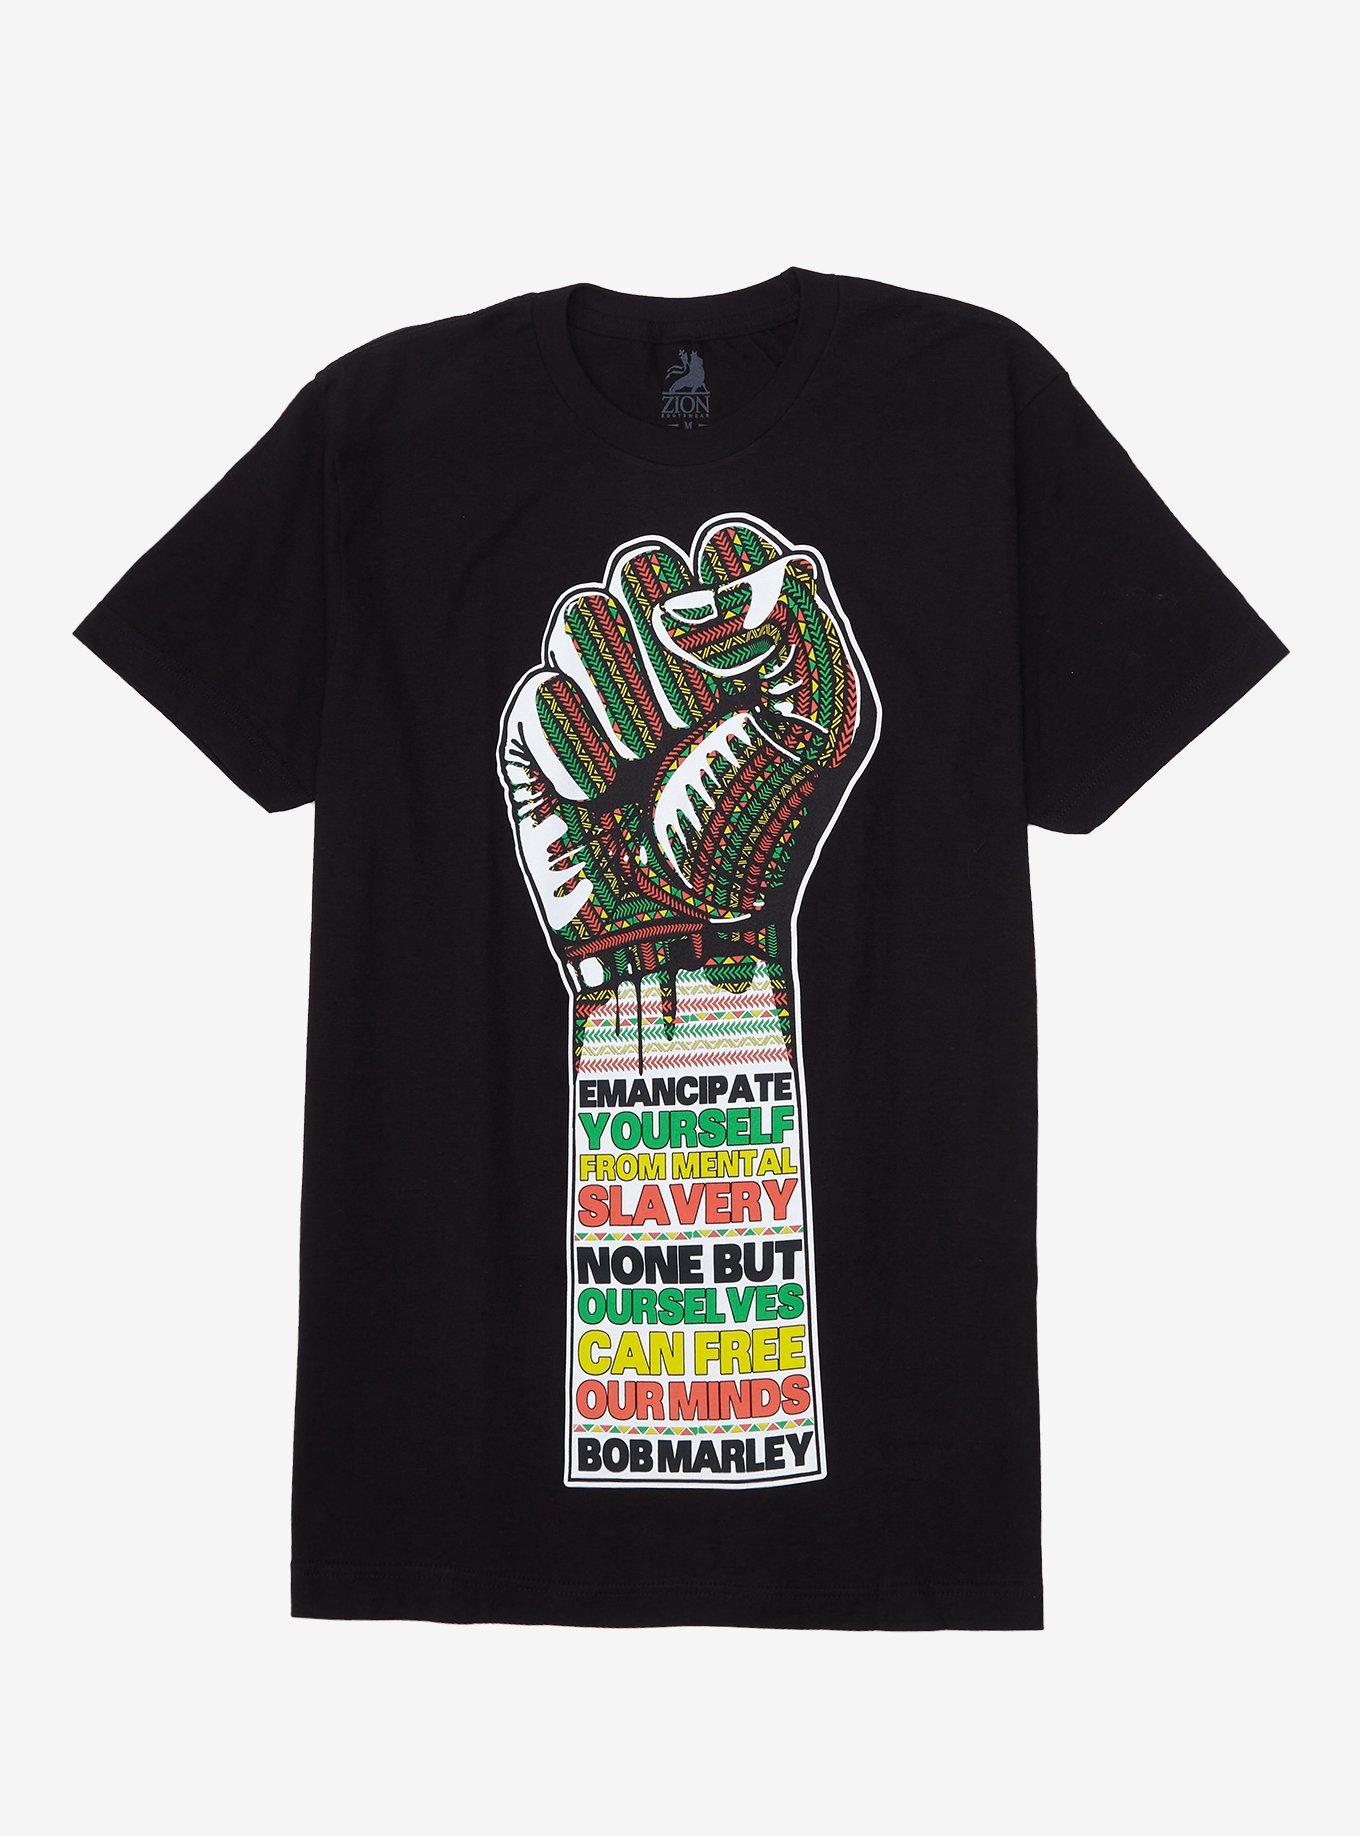 Bob Marley And The Wailers Redemption Song T-Shirt | Hot Topic